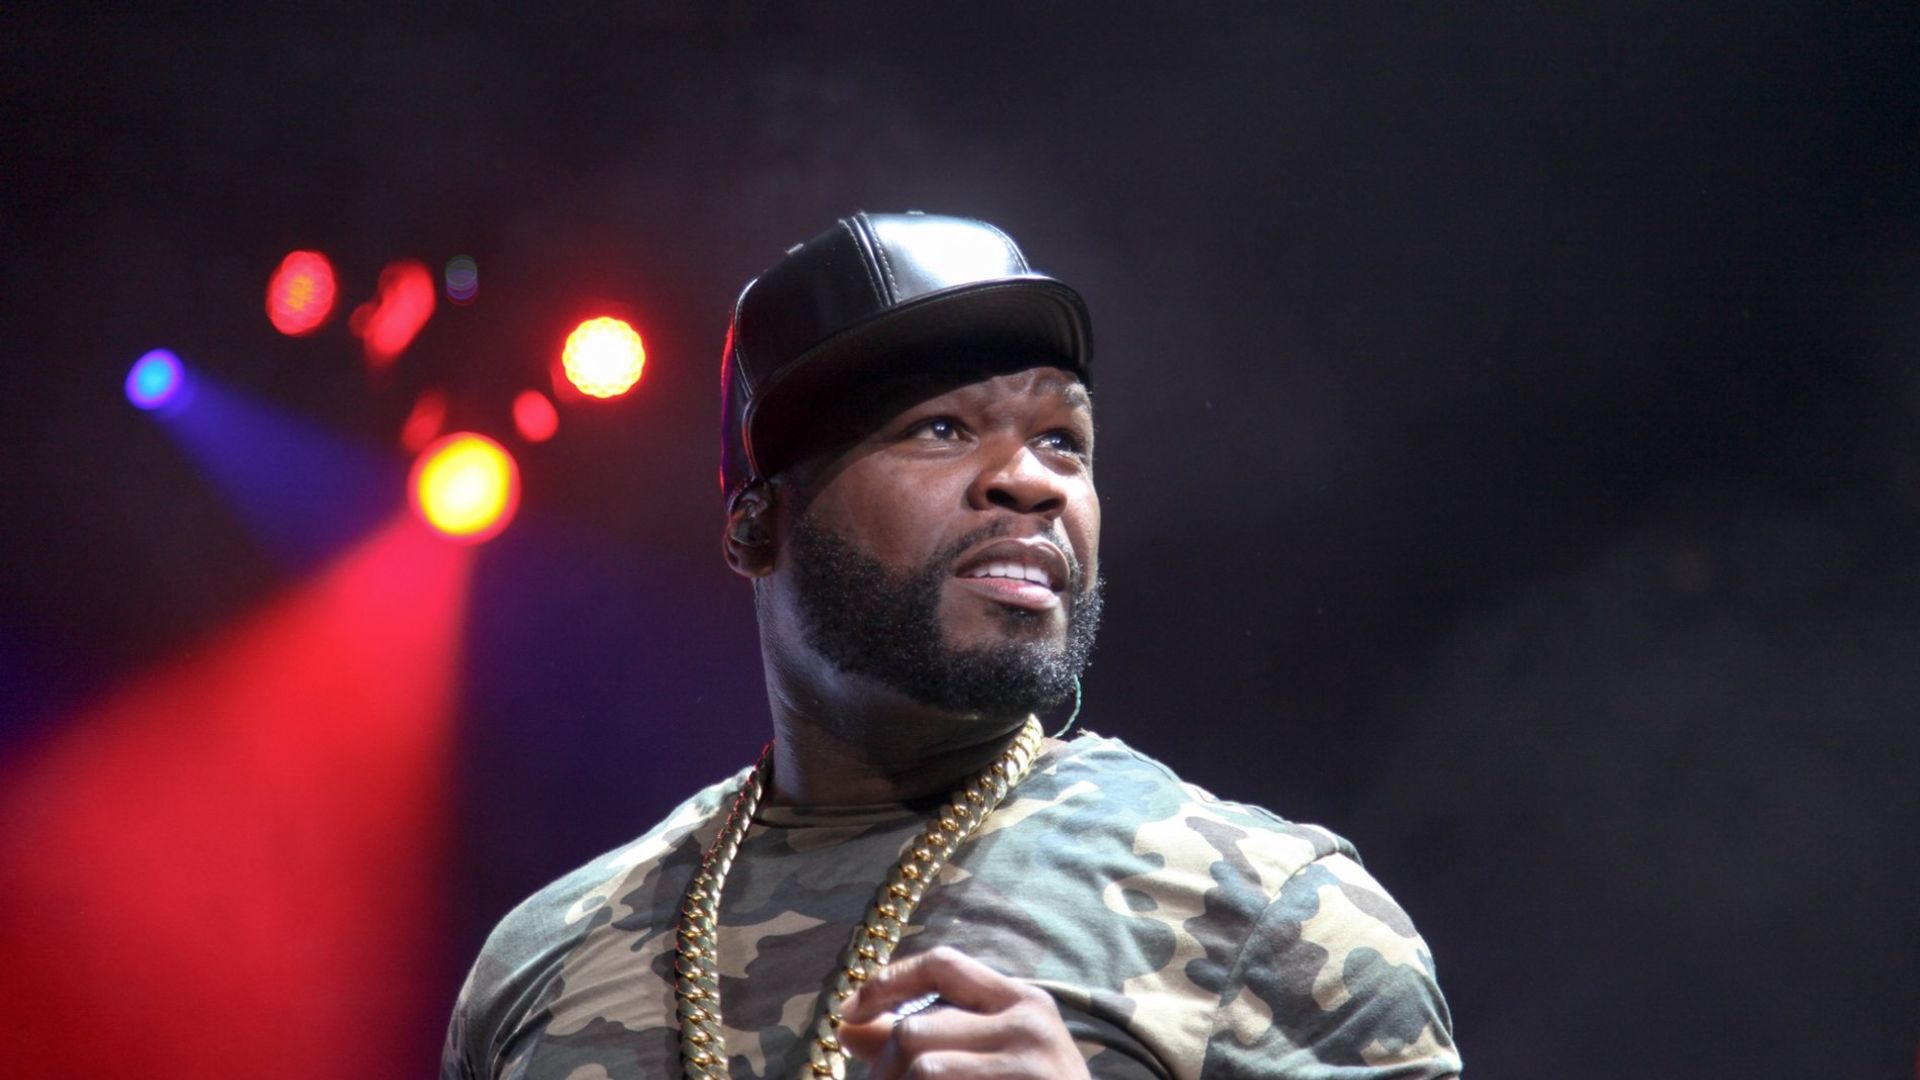 The rapper 50 Cent was hit by 9 bullets